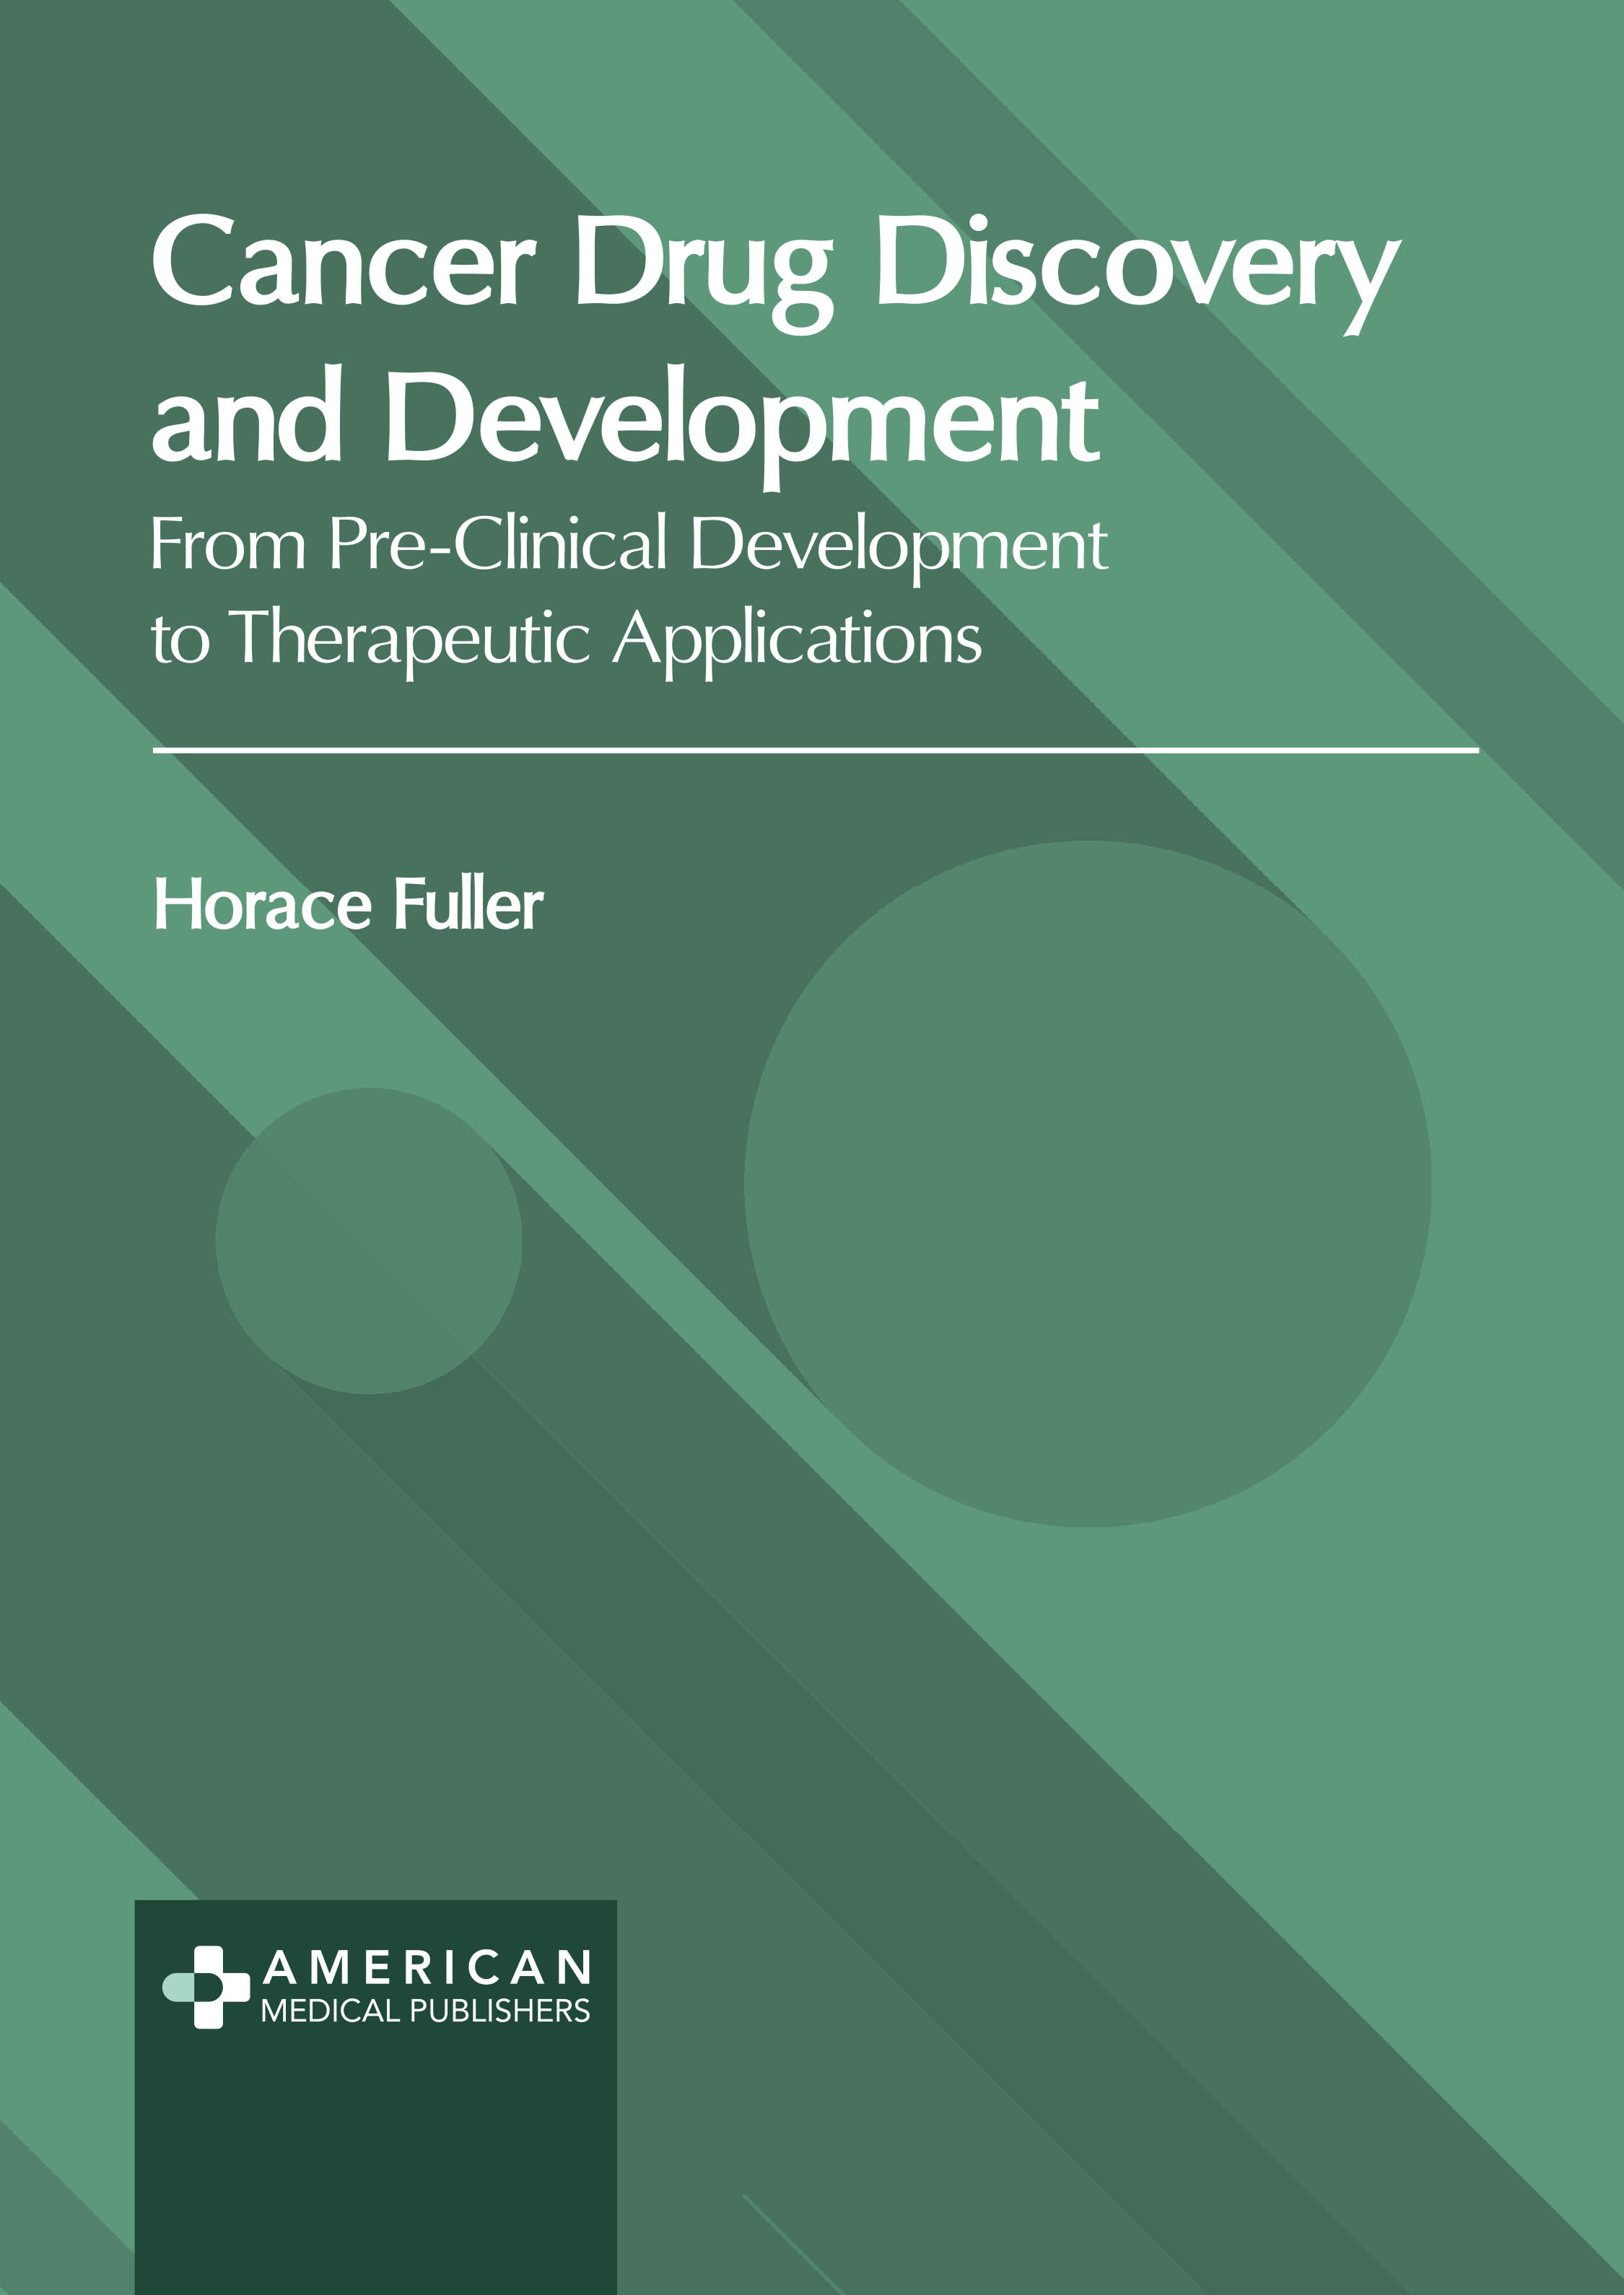 CANCER DRUG DISCOVERY AND DEVELOPMENT: FROM PRE-CLINICAL DEVELOPMENT TO THERAPEUTIC APPLICATIONS